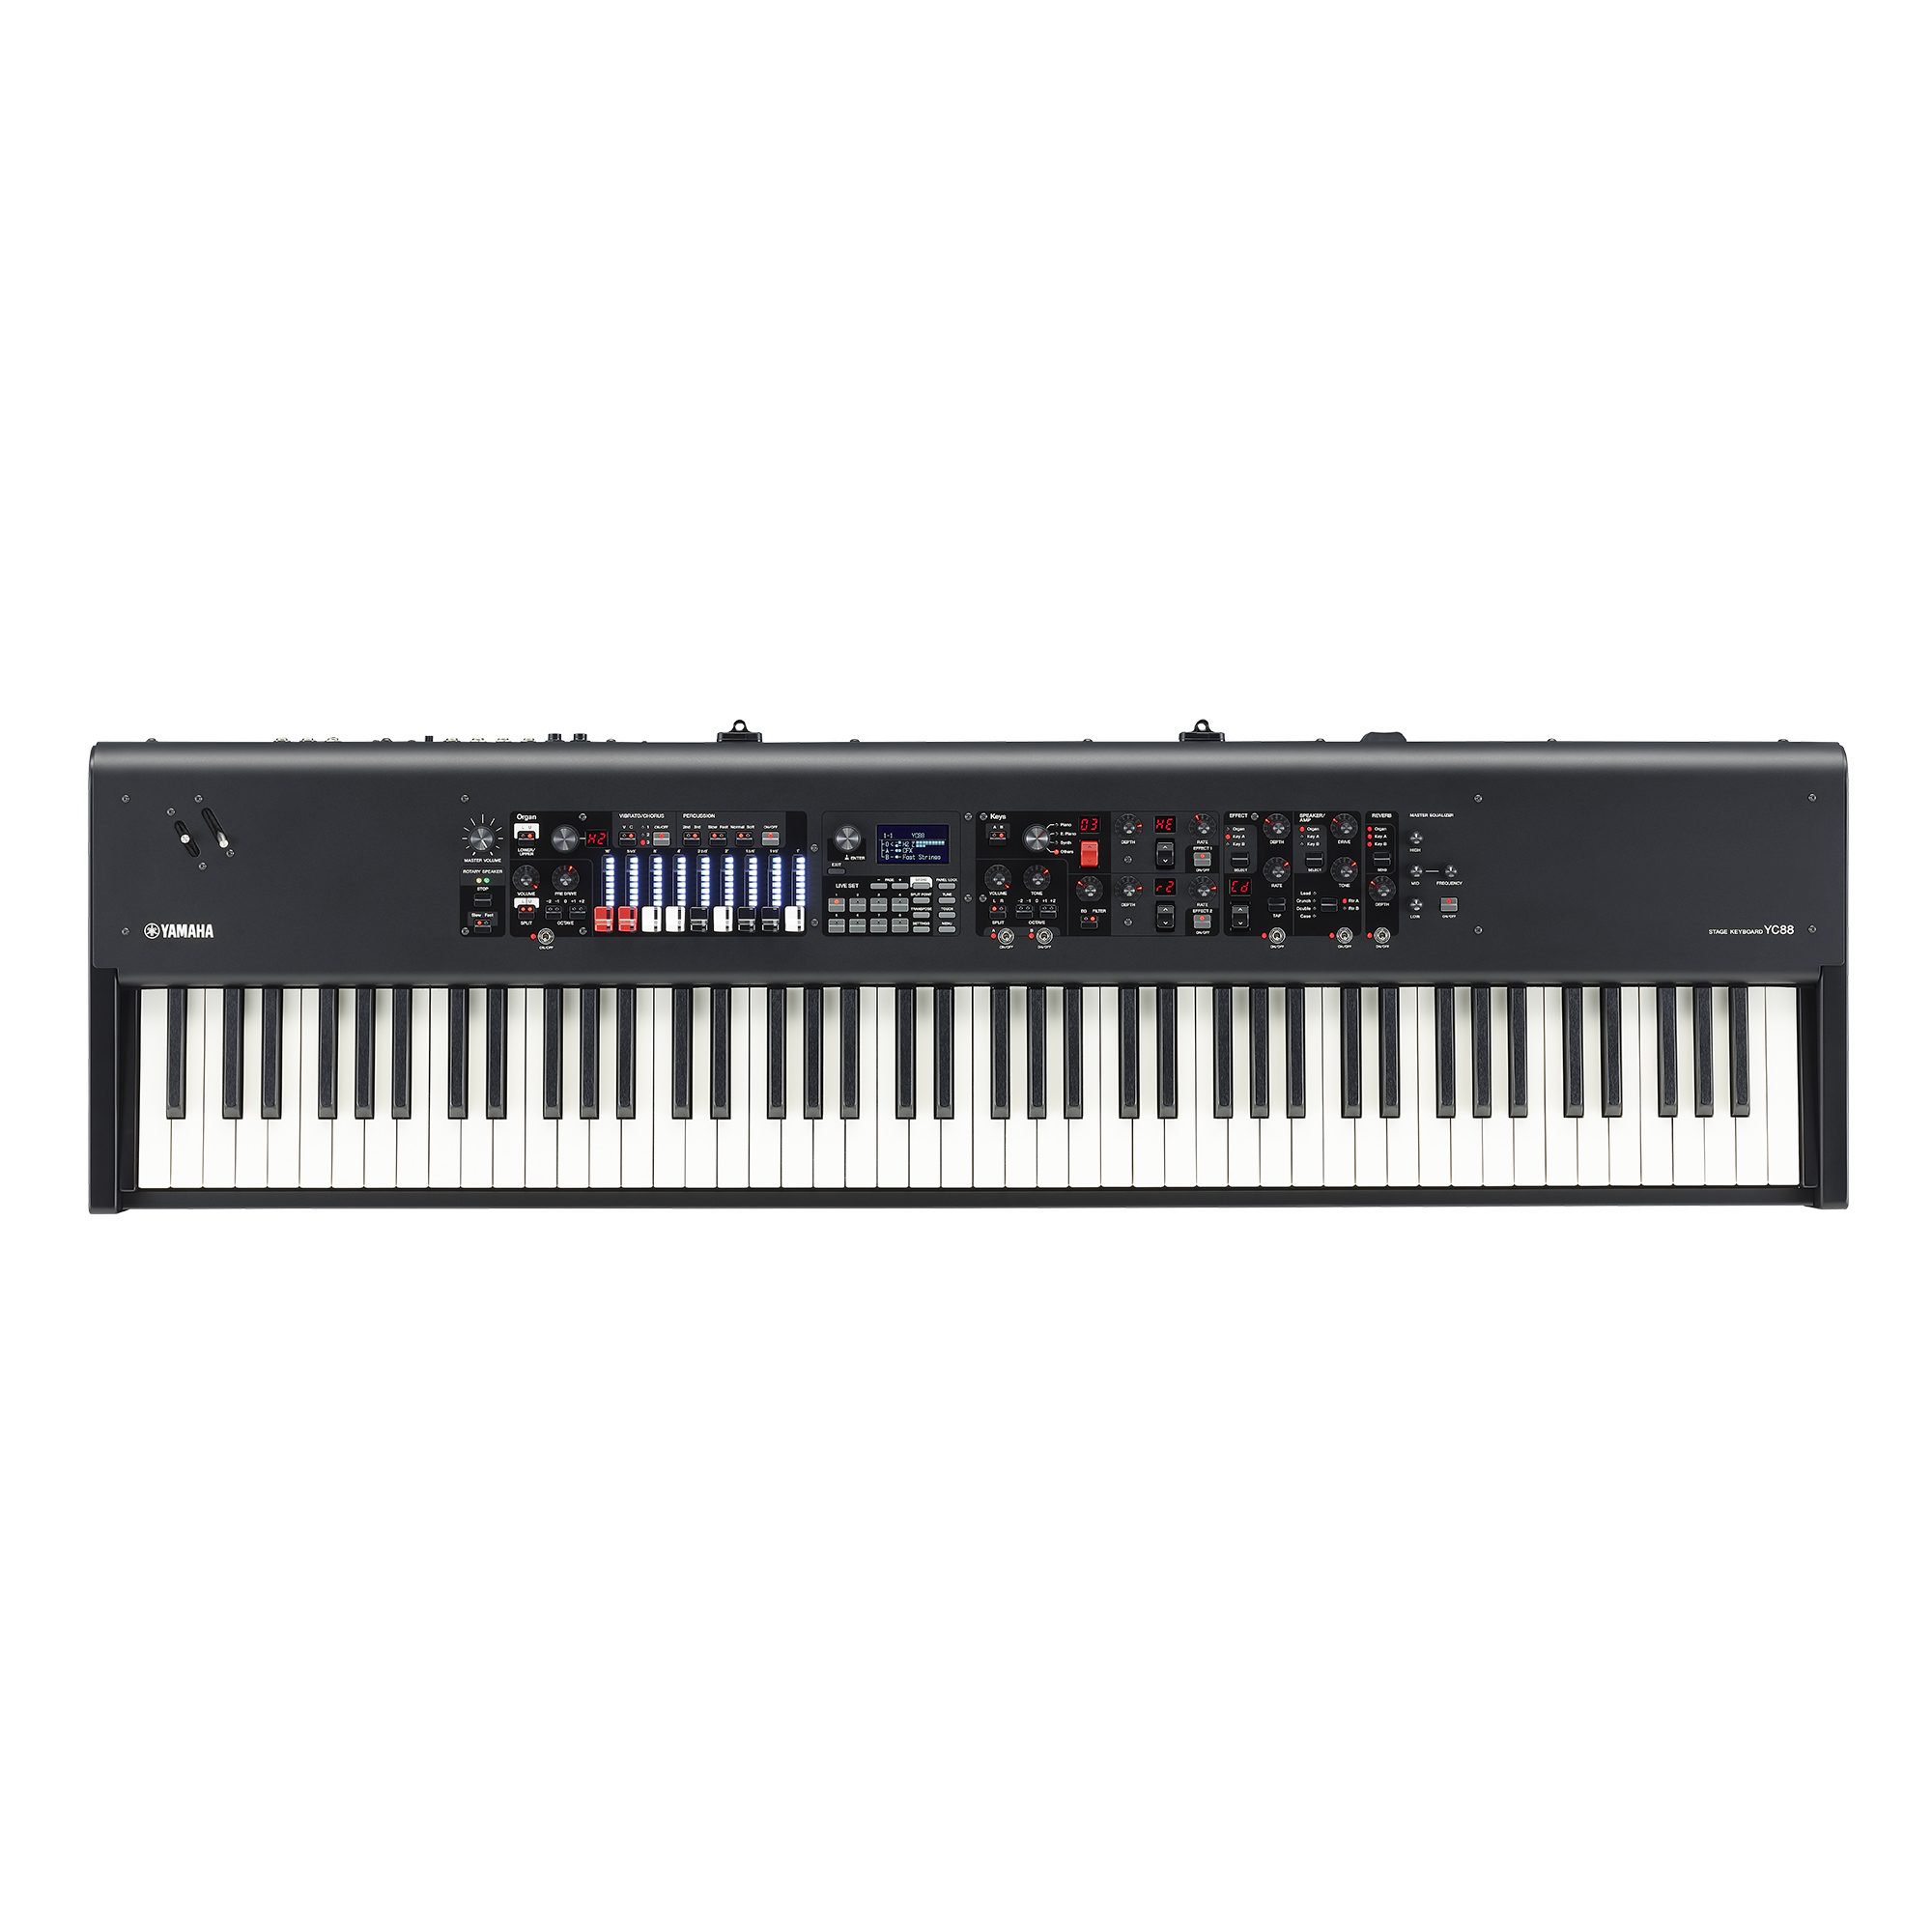 Stage Keyboards - Synthesizers & Music Production Tools - Products 